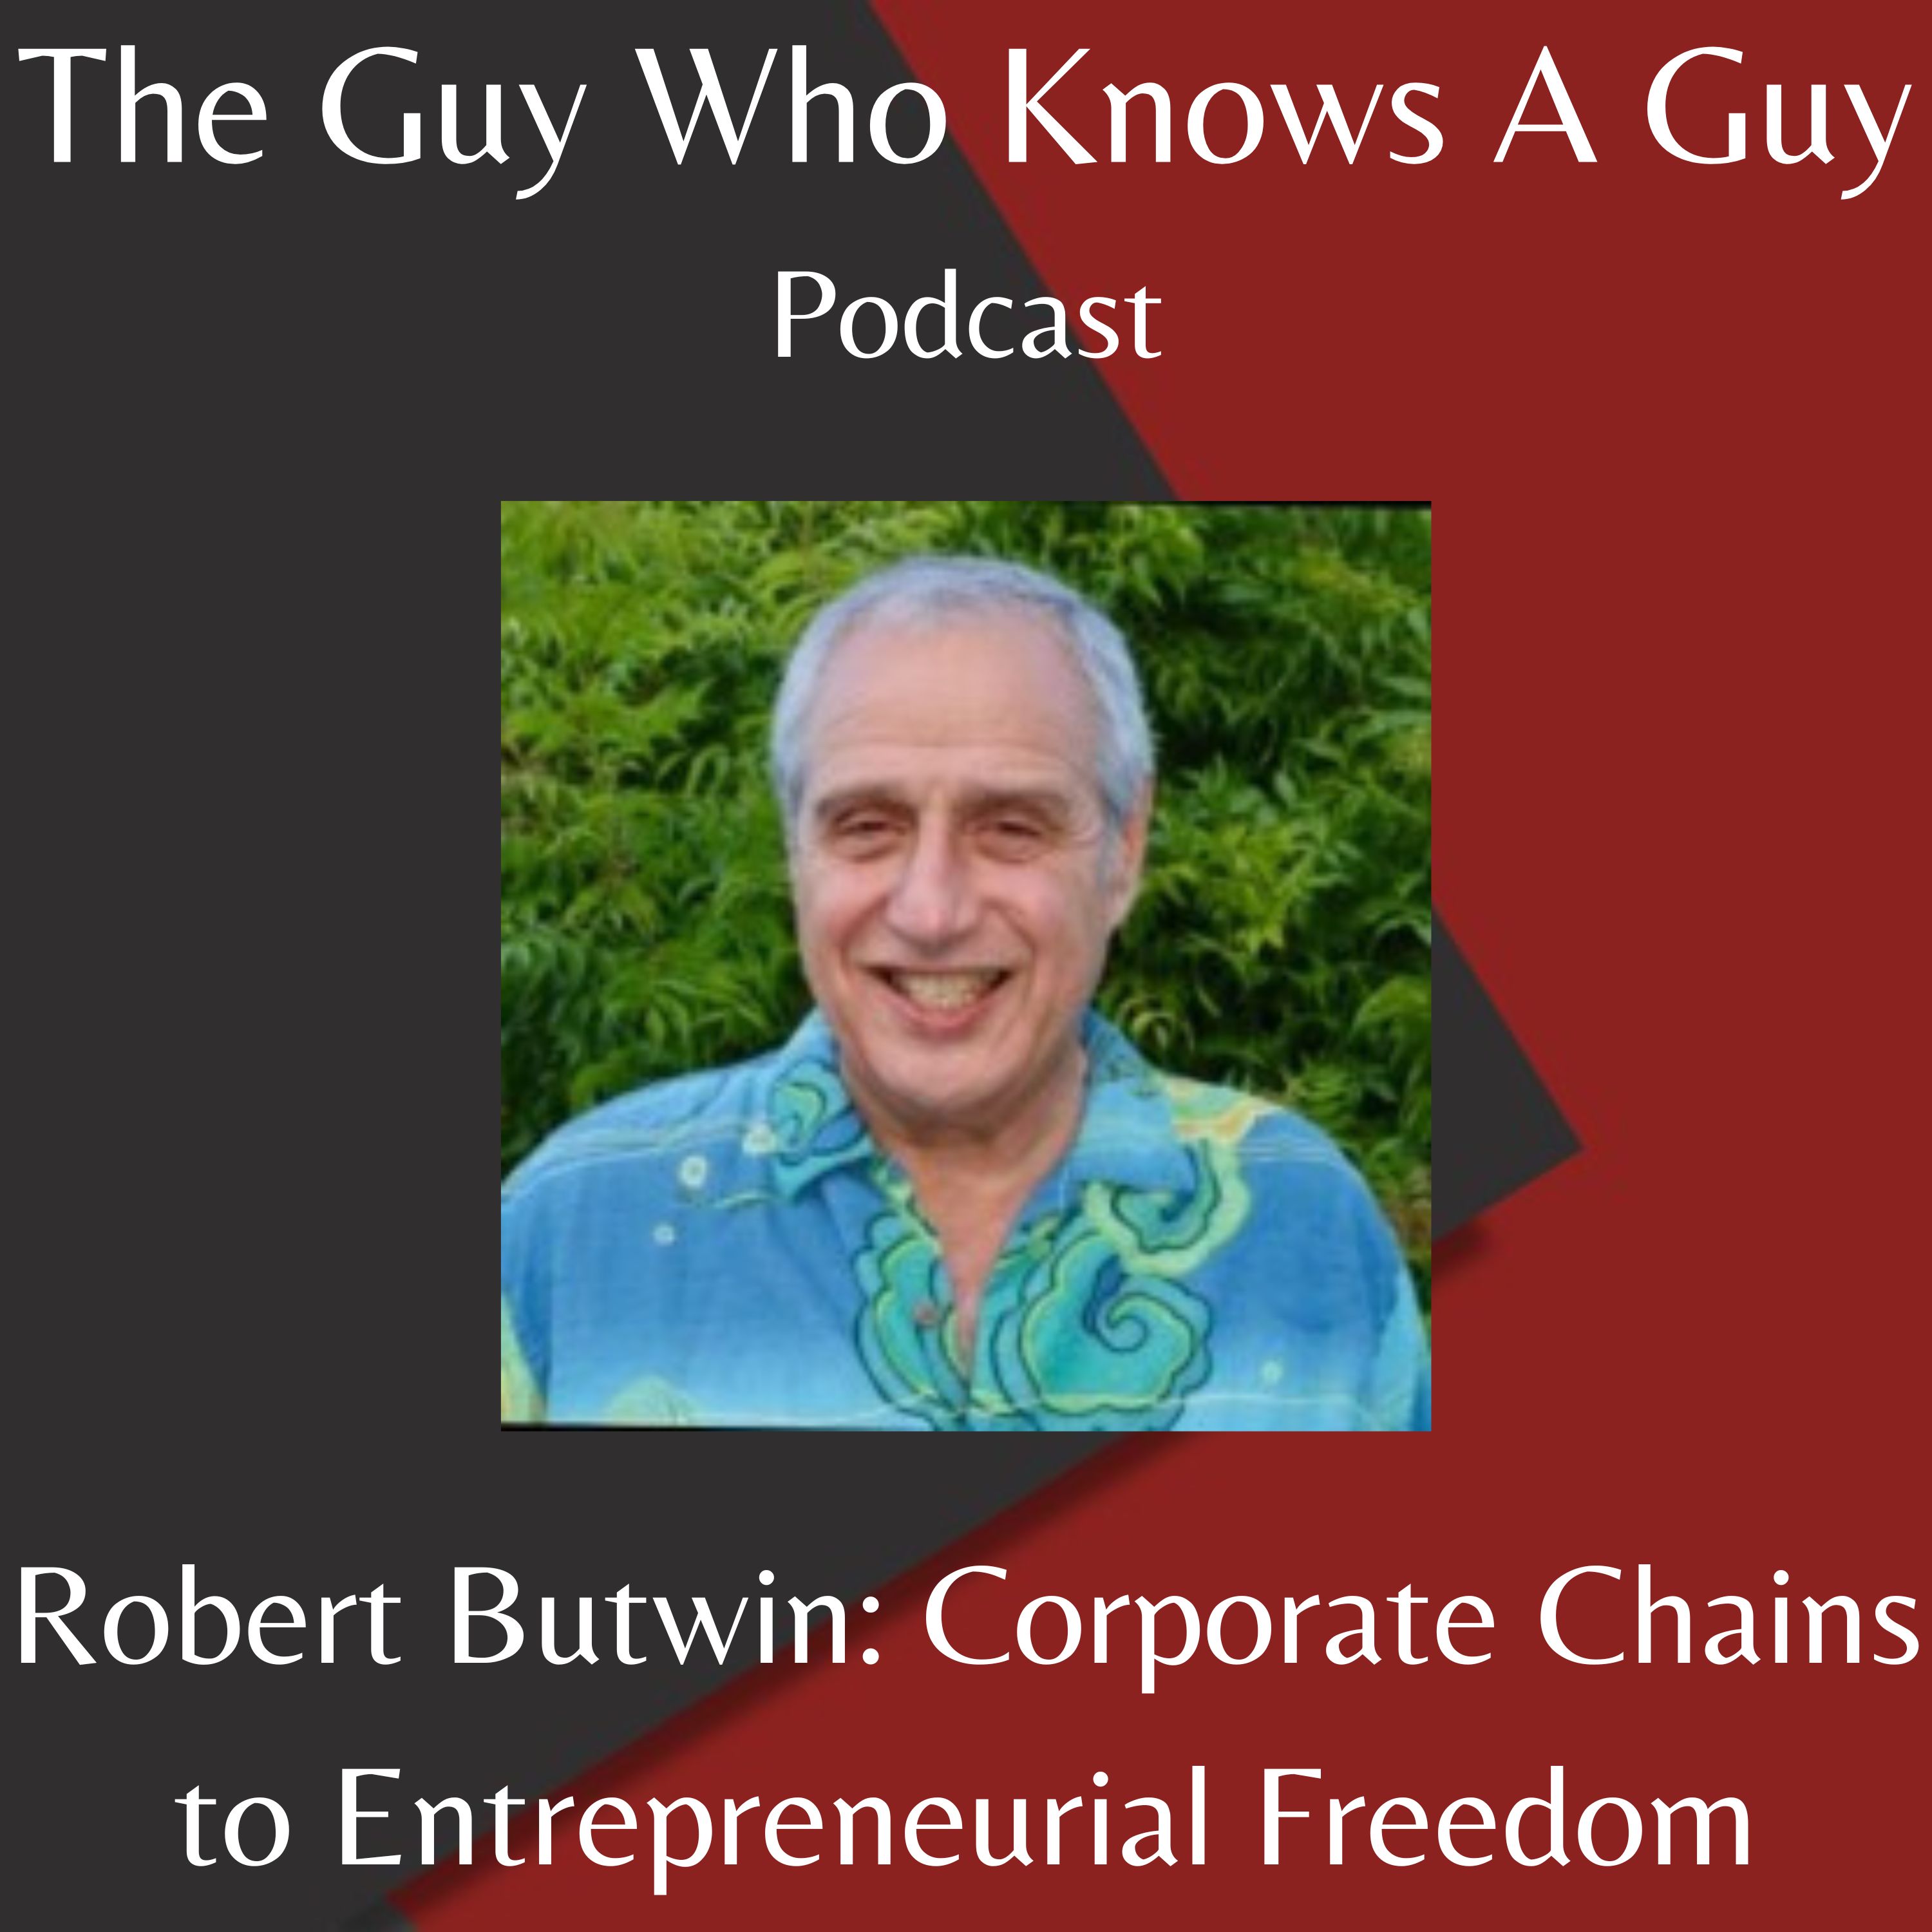 Robert Butwin: Corporate Chains to Entrepreneurial Freedom